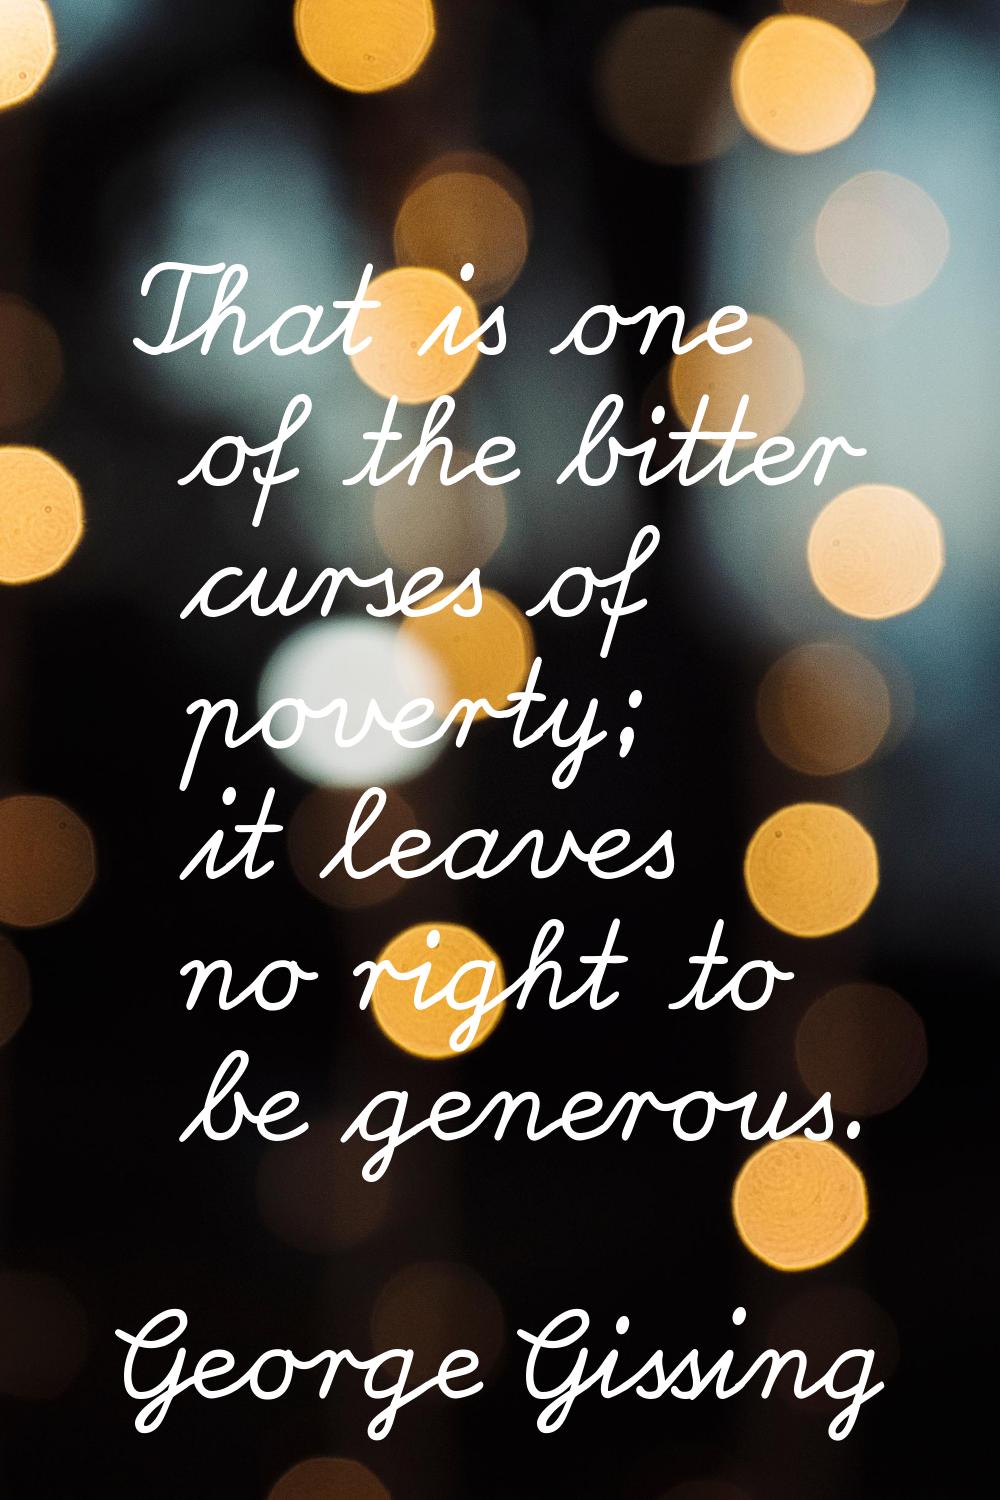 That is one of the bitter curses of poverty; it leaves no right to be generous.